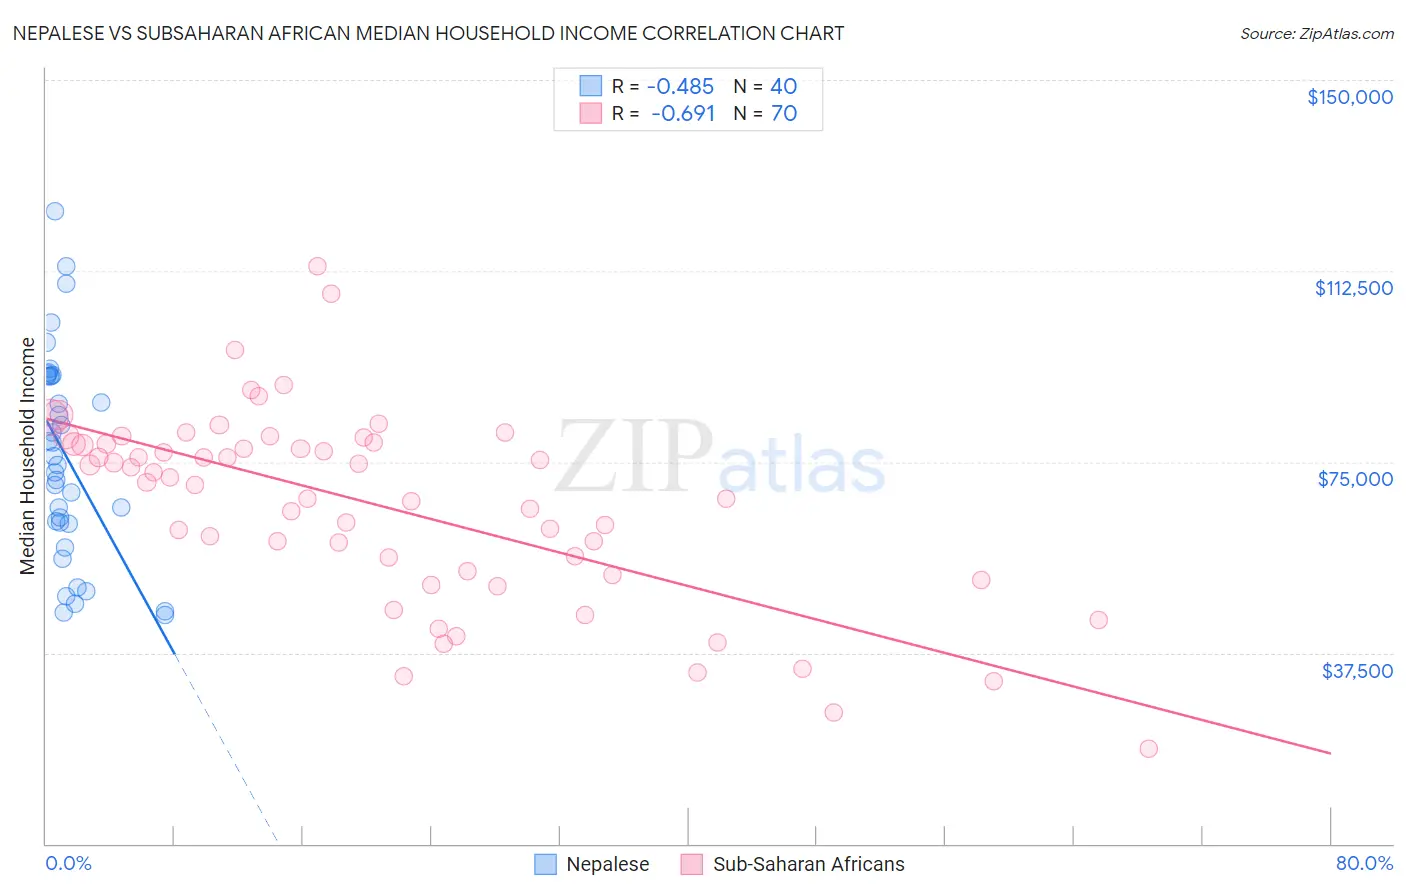 Nepalese vs Subsaharan African Median Household Income